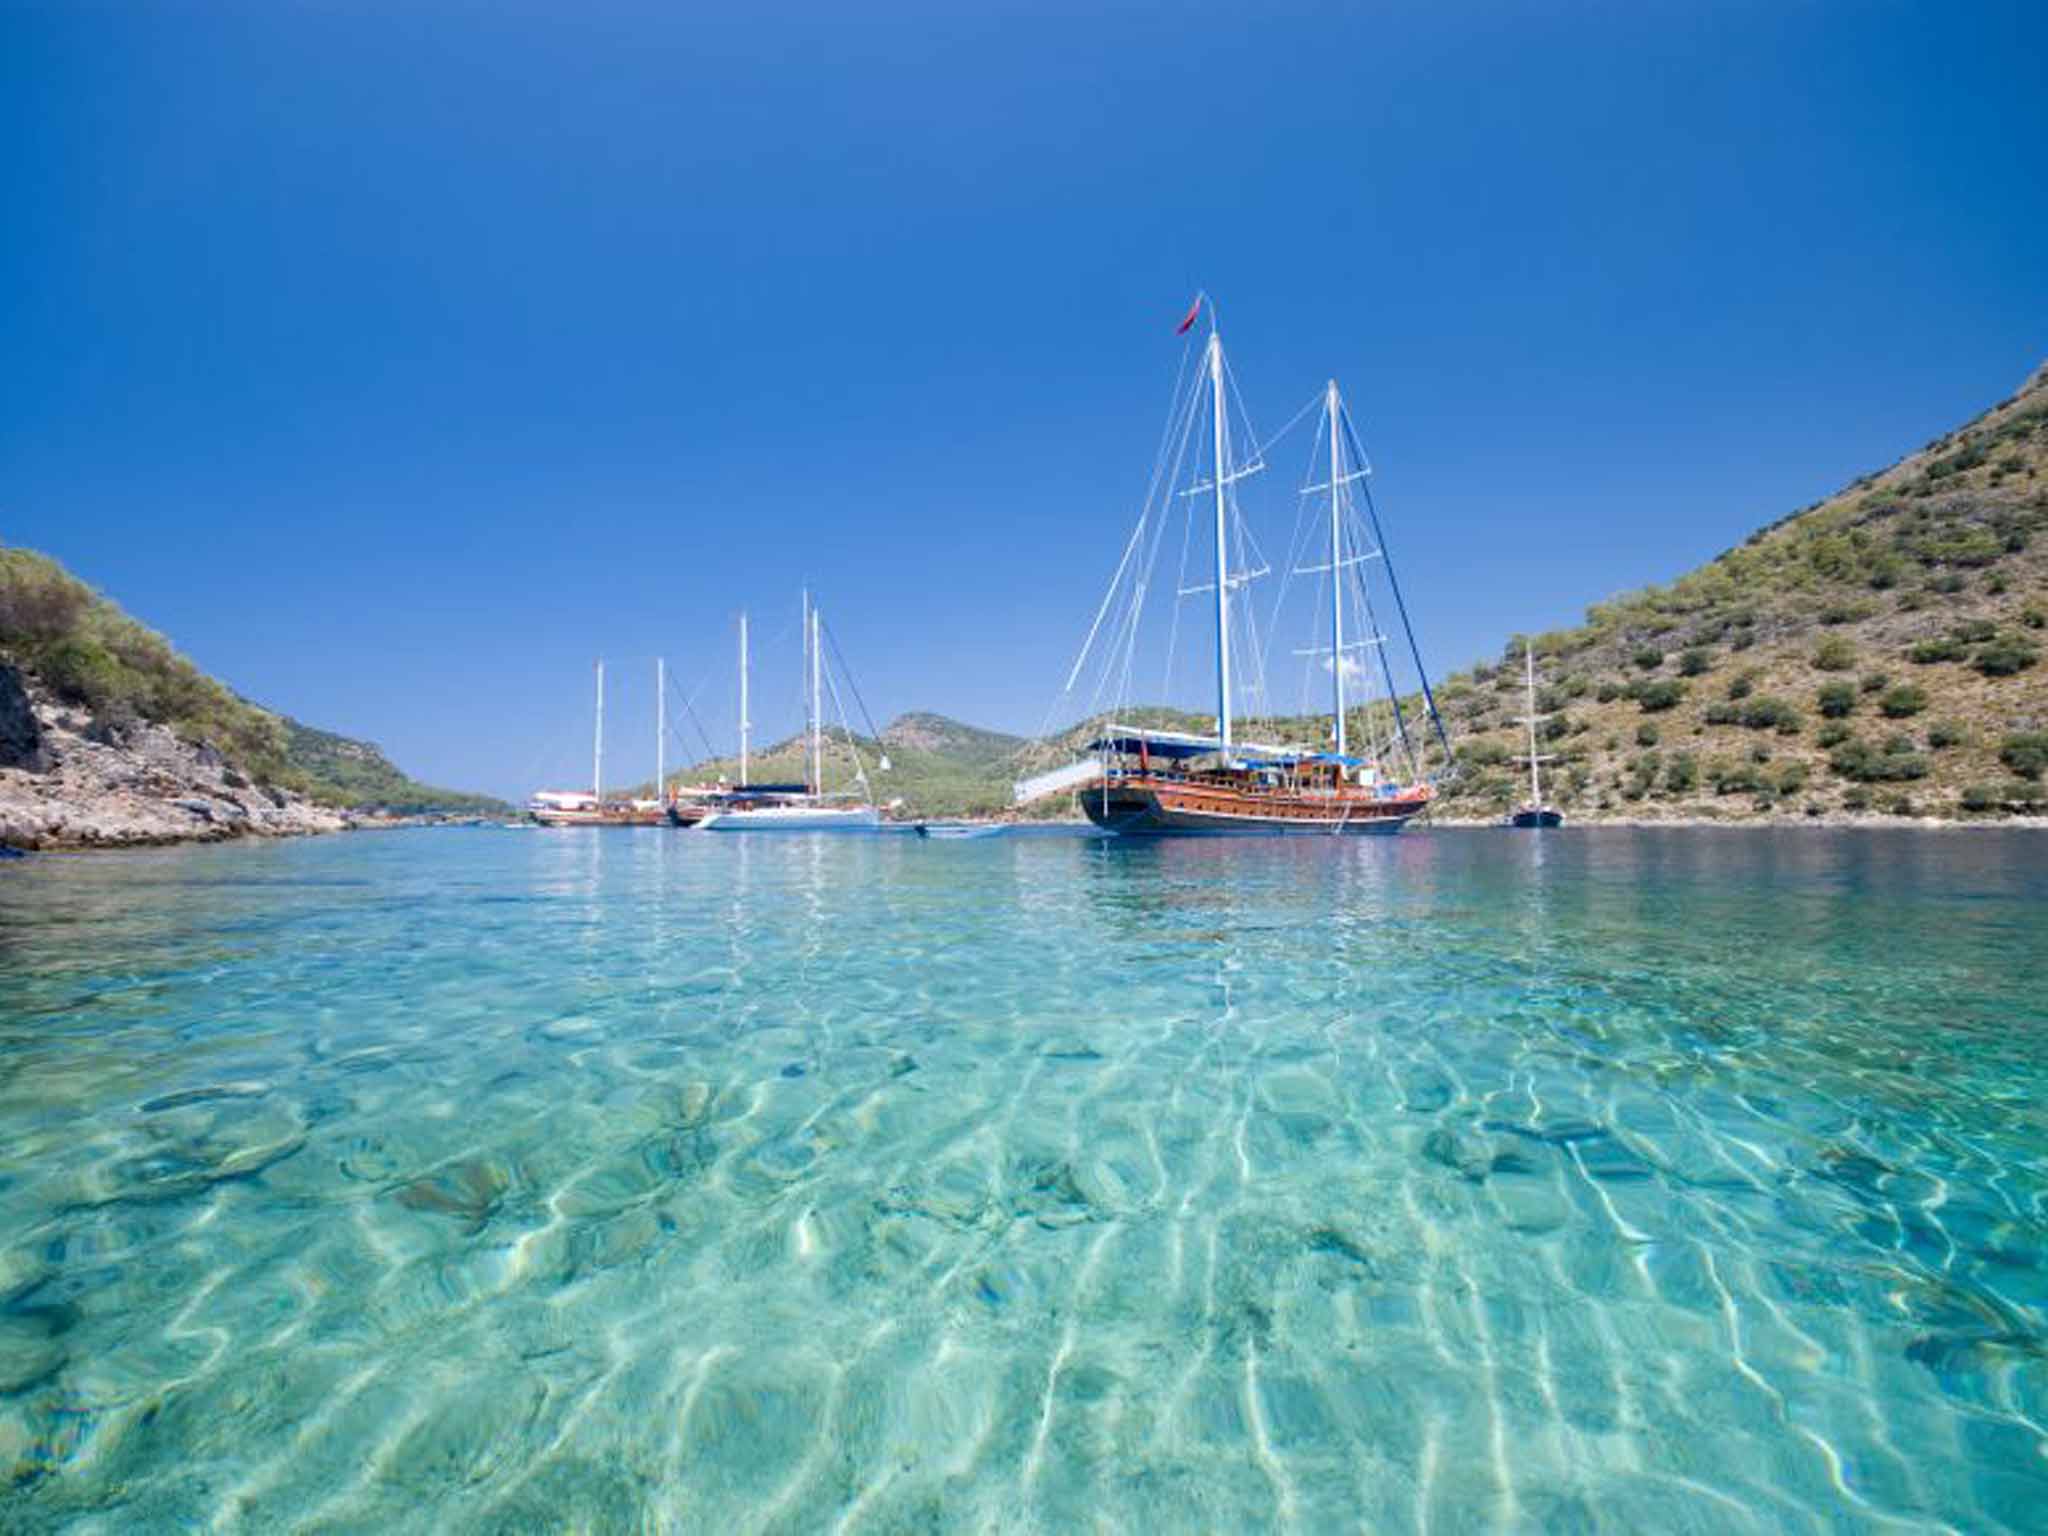 Park and glide: gulets are the traditional way to explore Turkey's shoreline